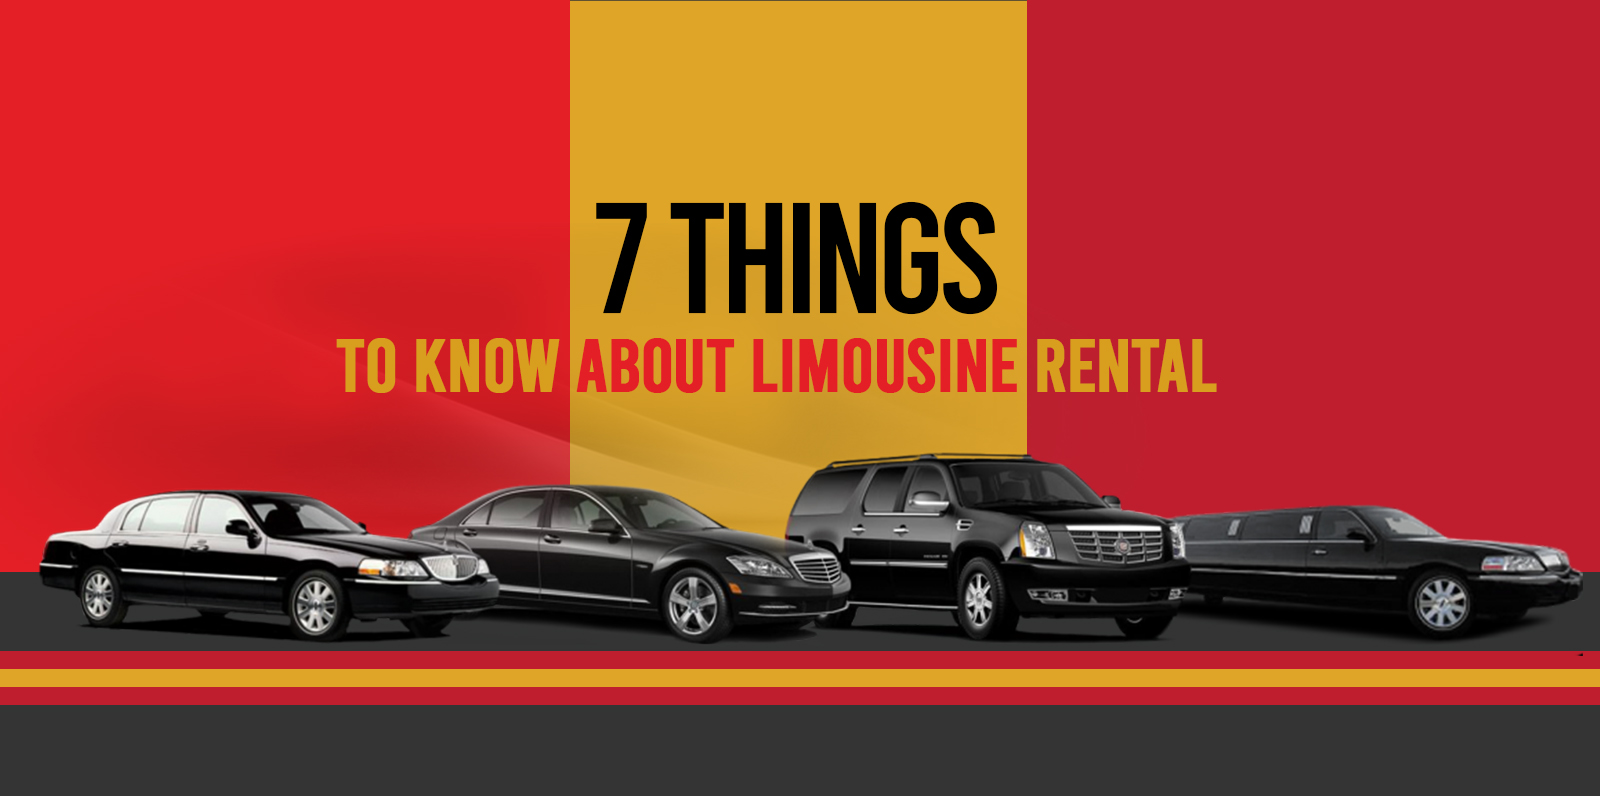 Seven Things To Know About Limousine Rental